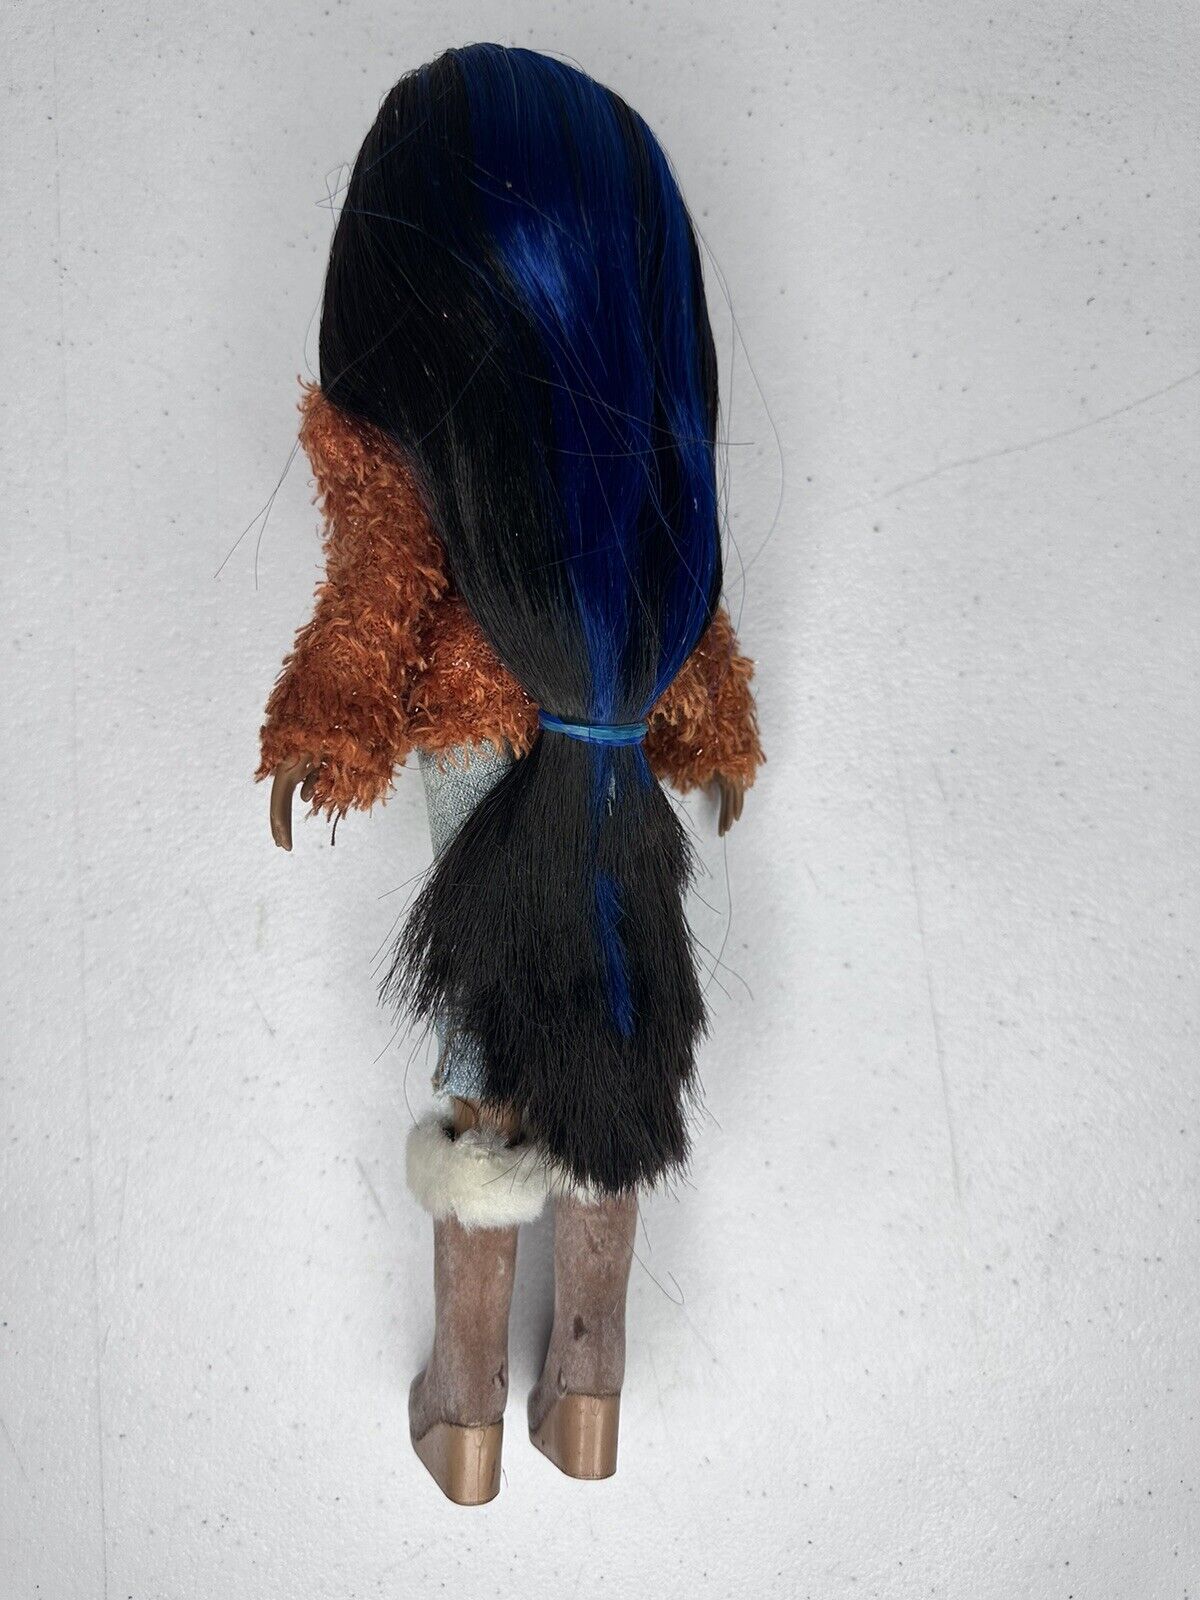 2015 MGA Bratz Doll - Long Black Hair with Blue Streaks, Fashion Collectible Toy Figure - TreasuTiques